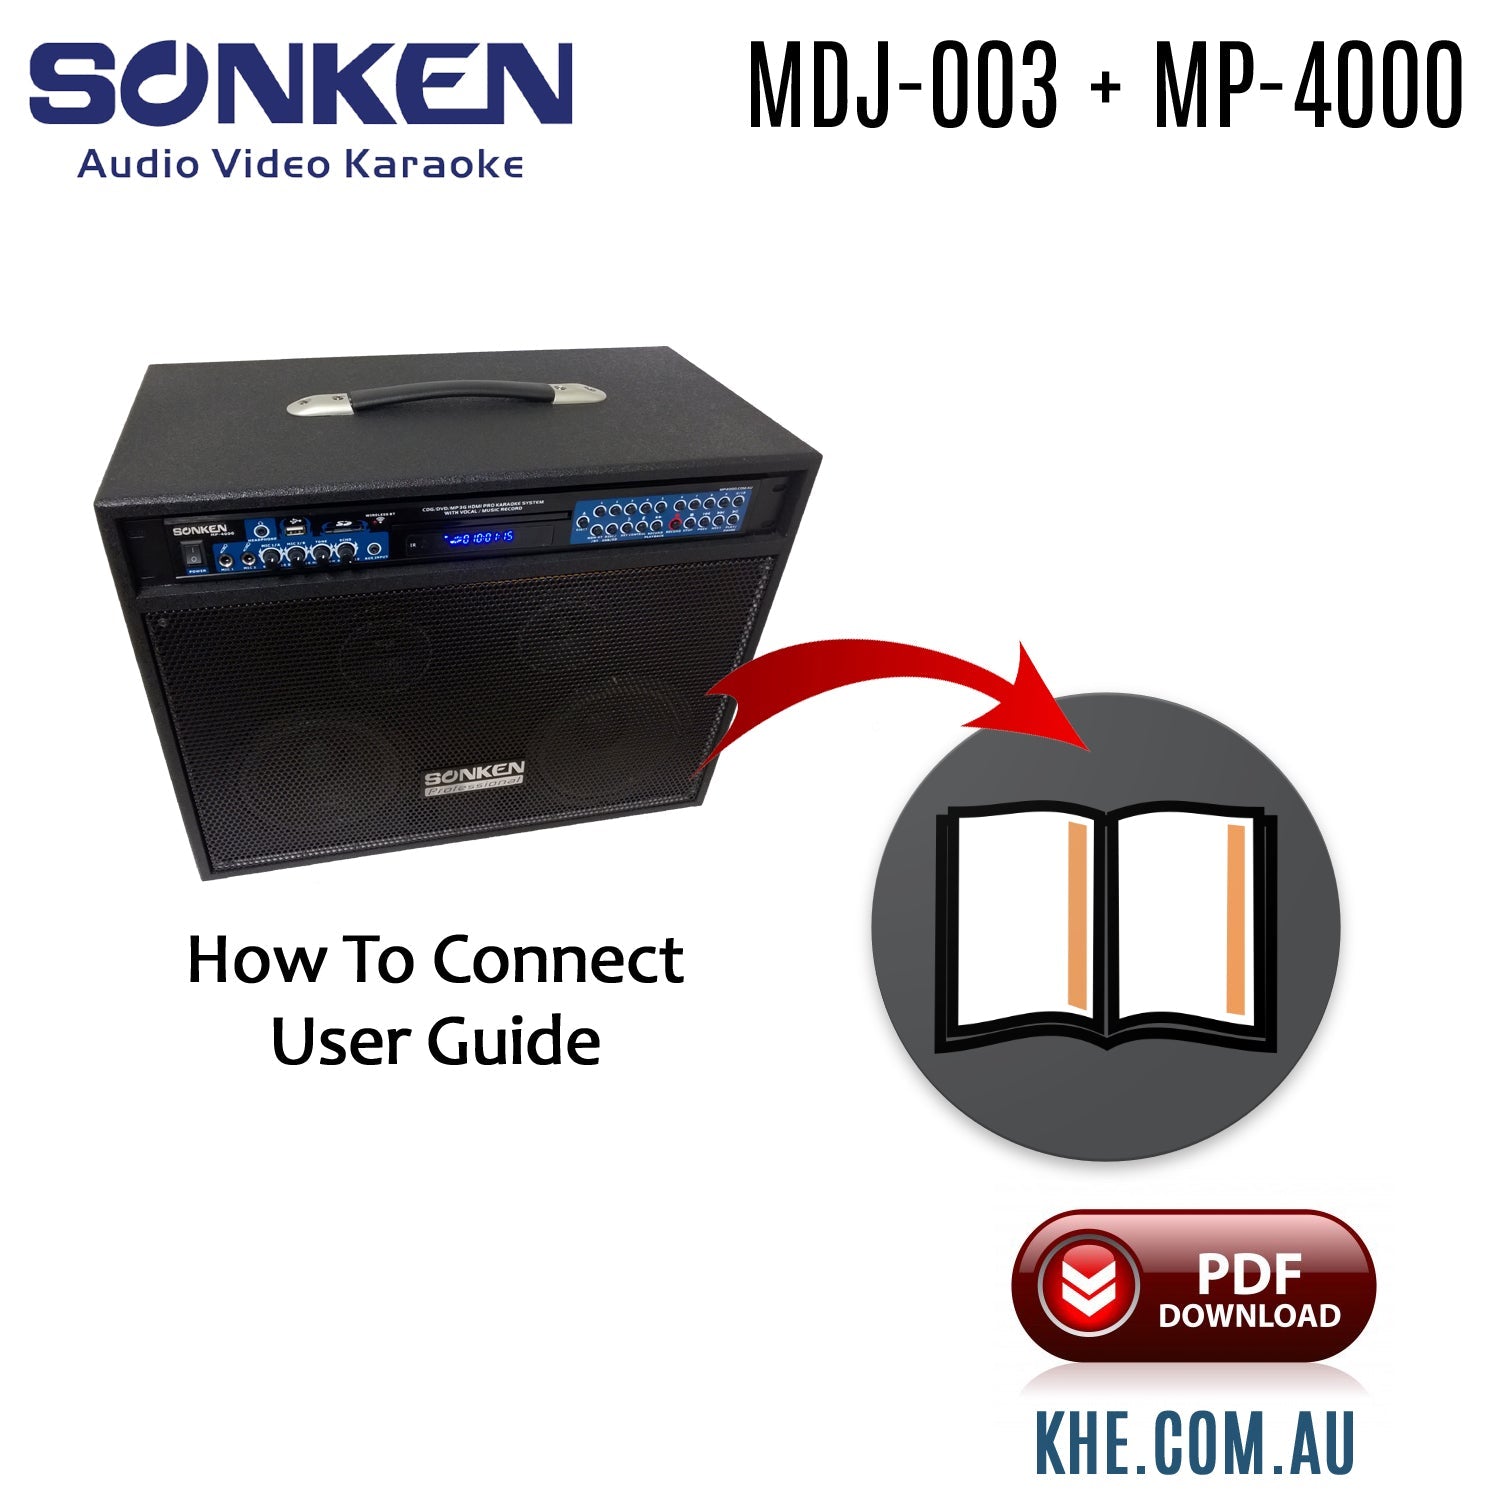 How To Connect Guide - DJ Buster (Series MDJ-003) with Sonken MP4000 - Karaoke Home Entertainment